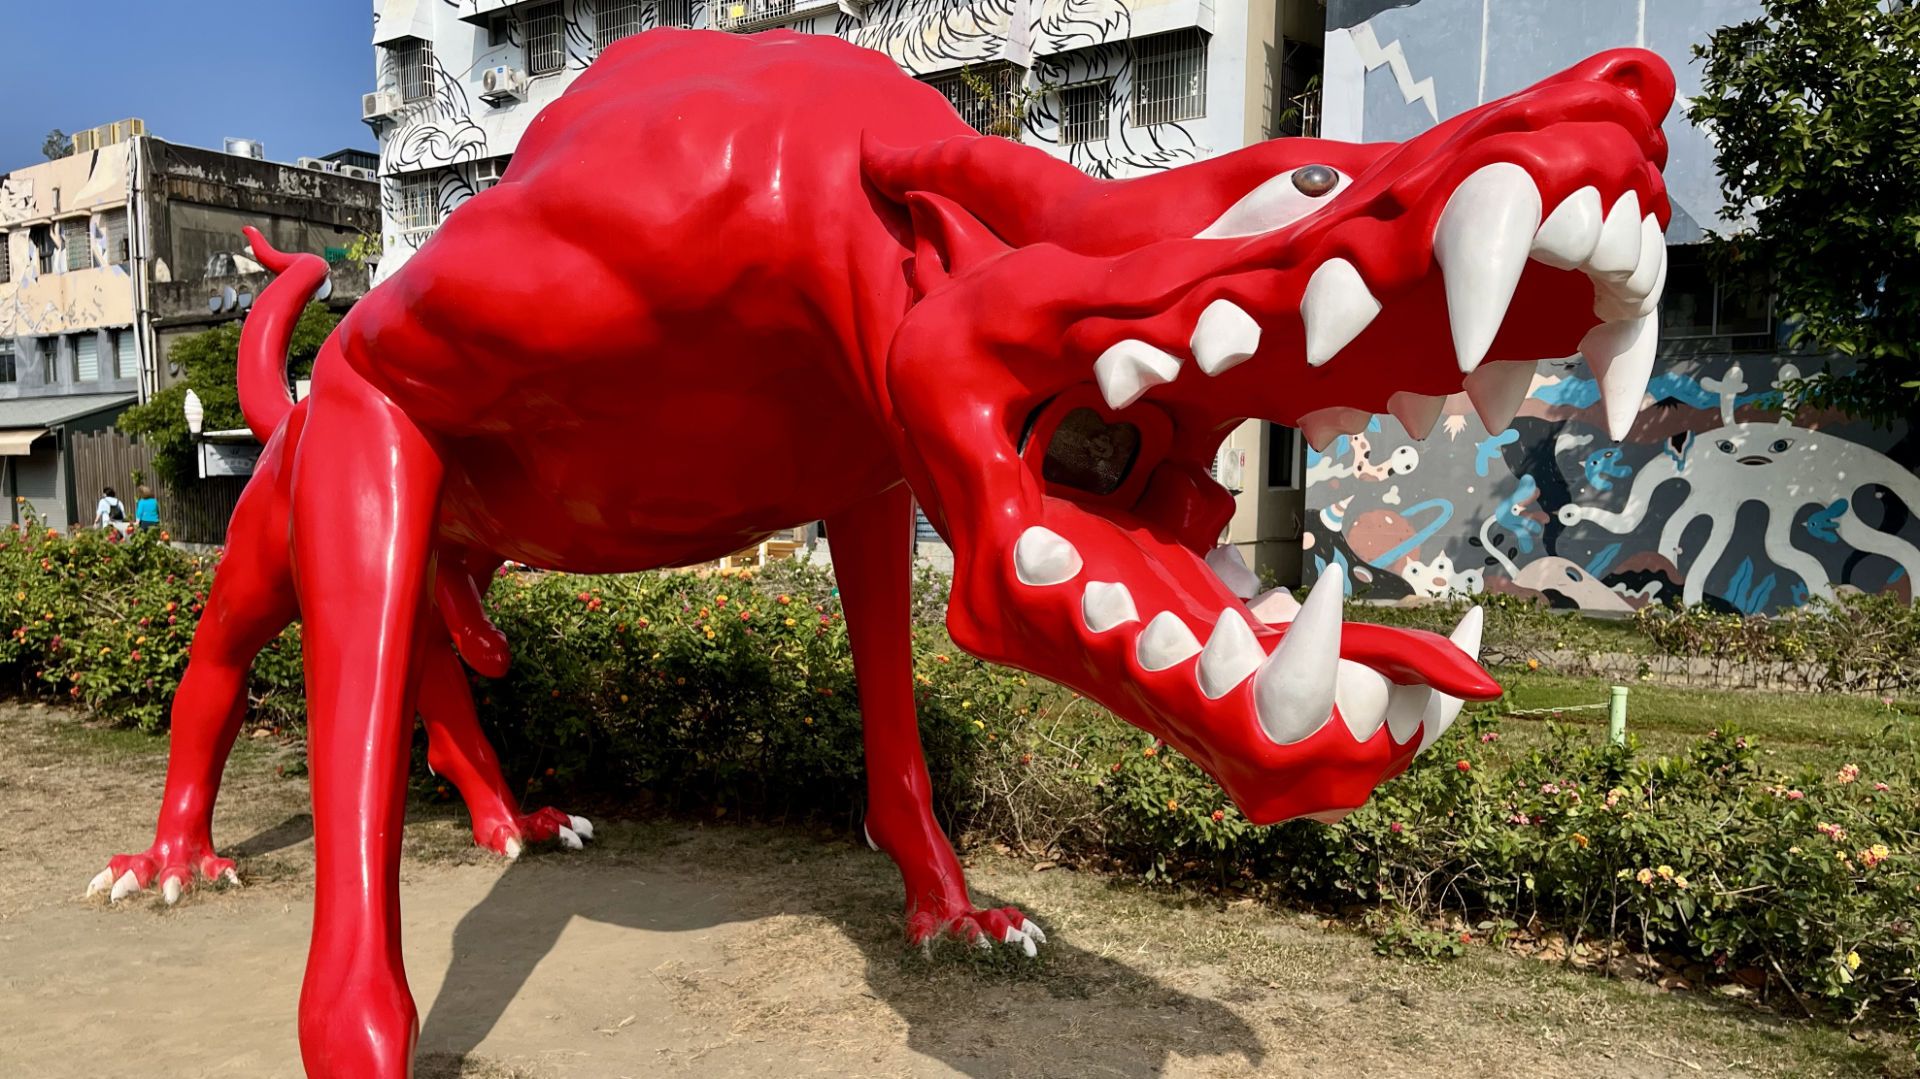 A sculpture of a large, bright red, dog-like creature with fierce teeth and eyes.